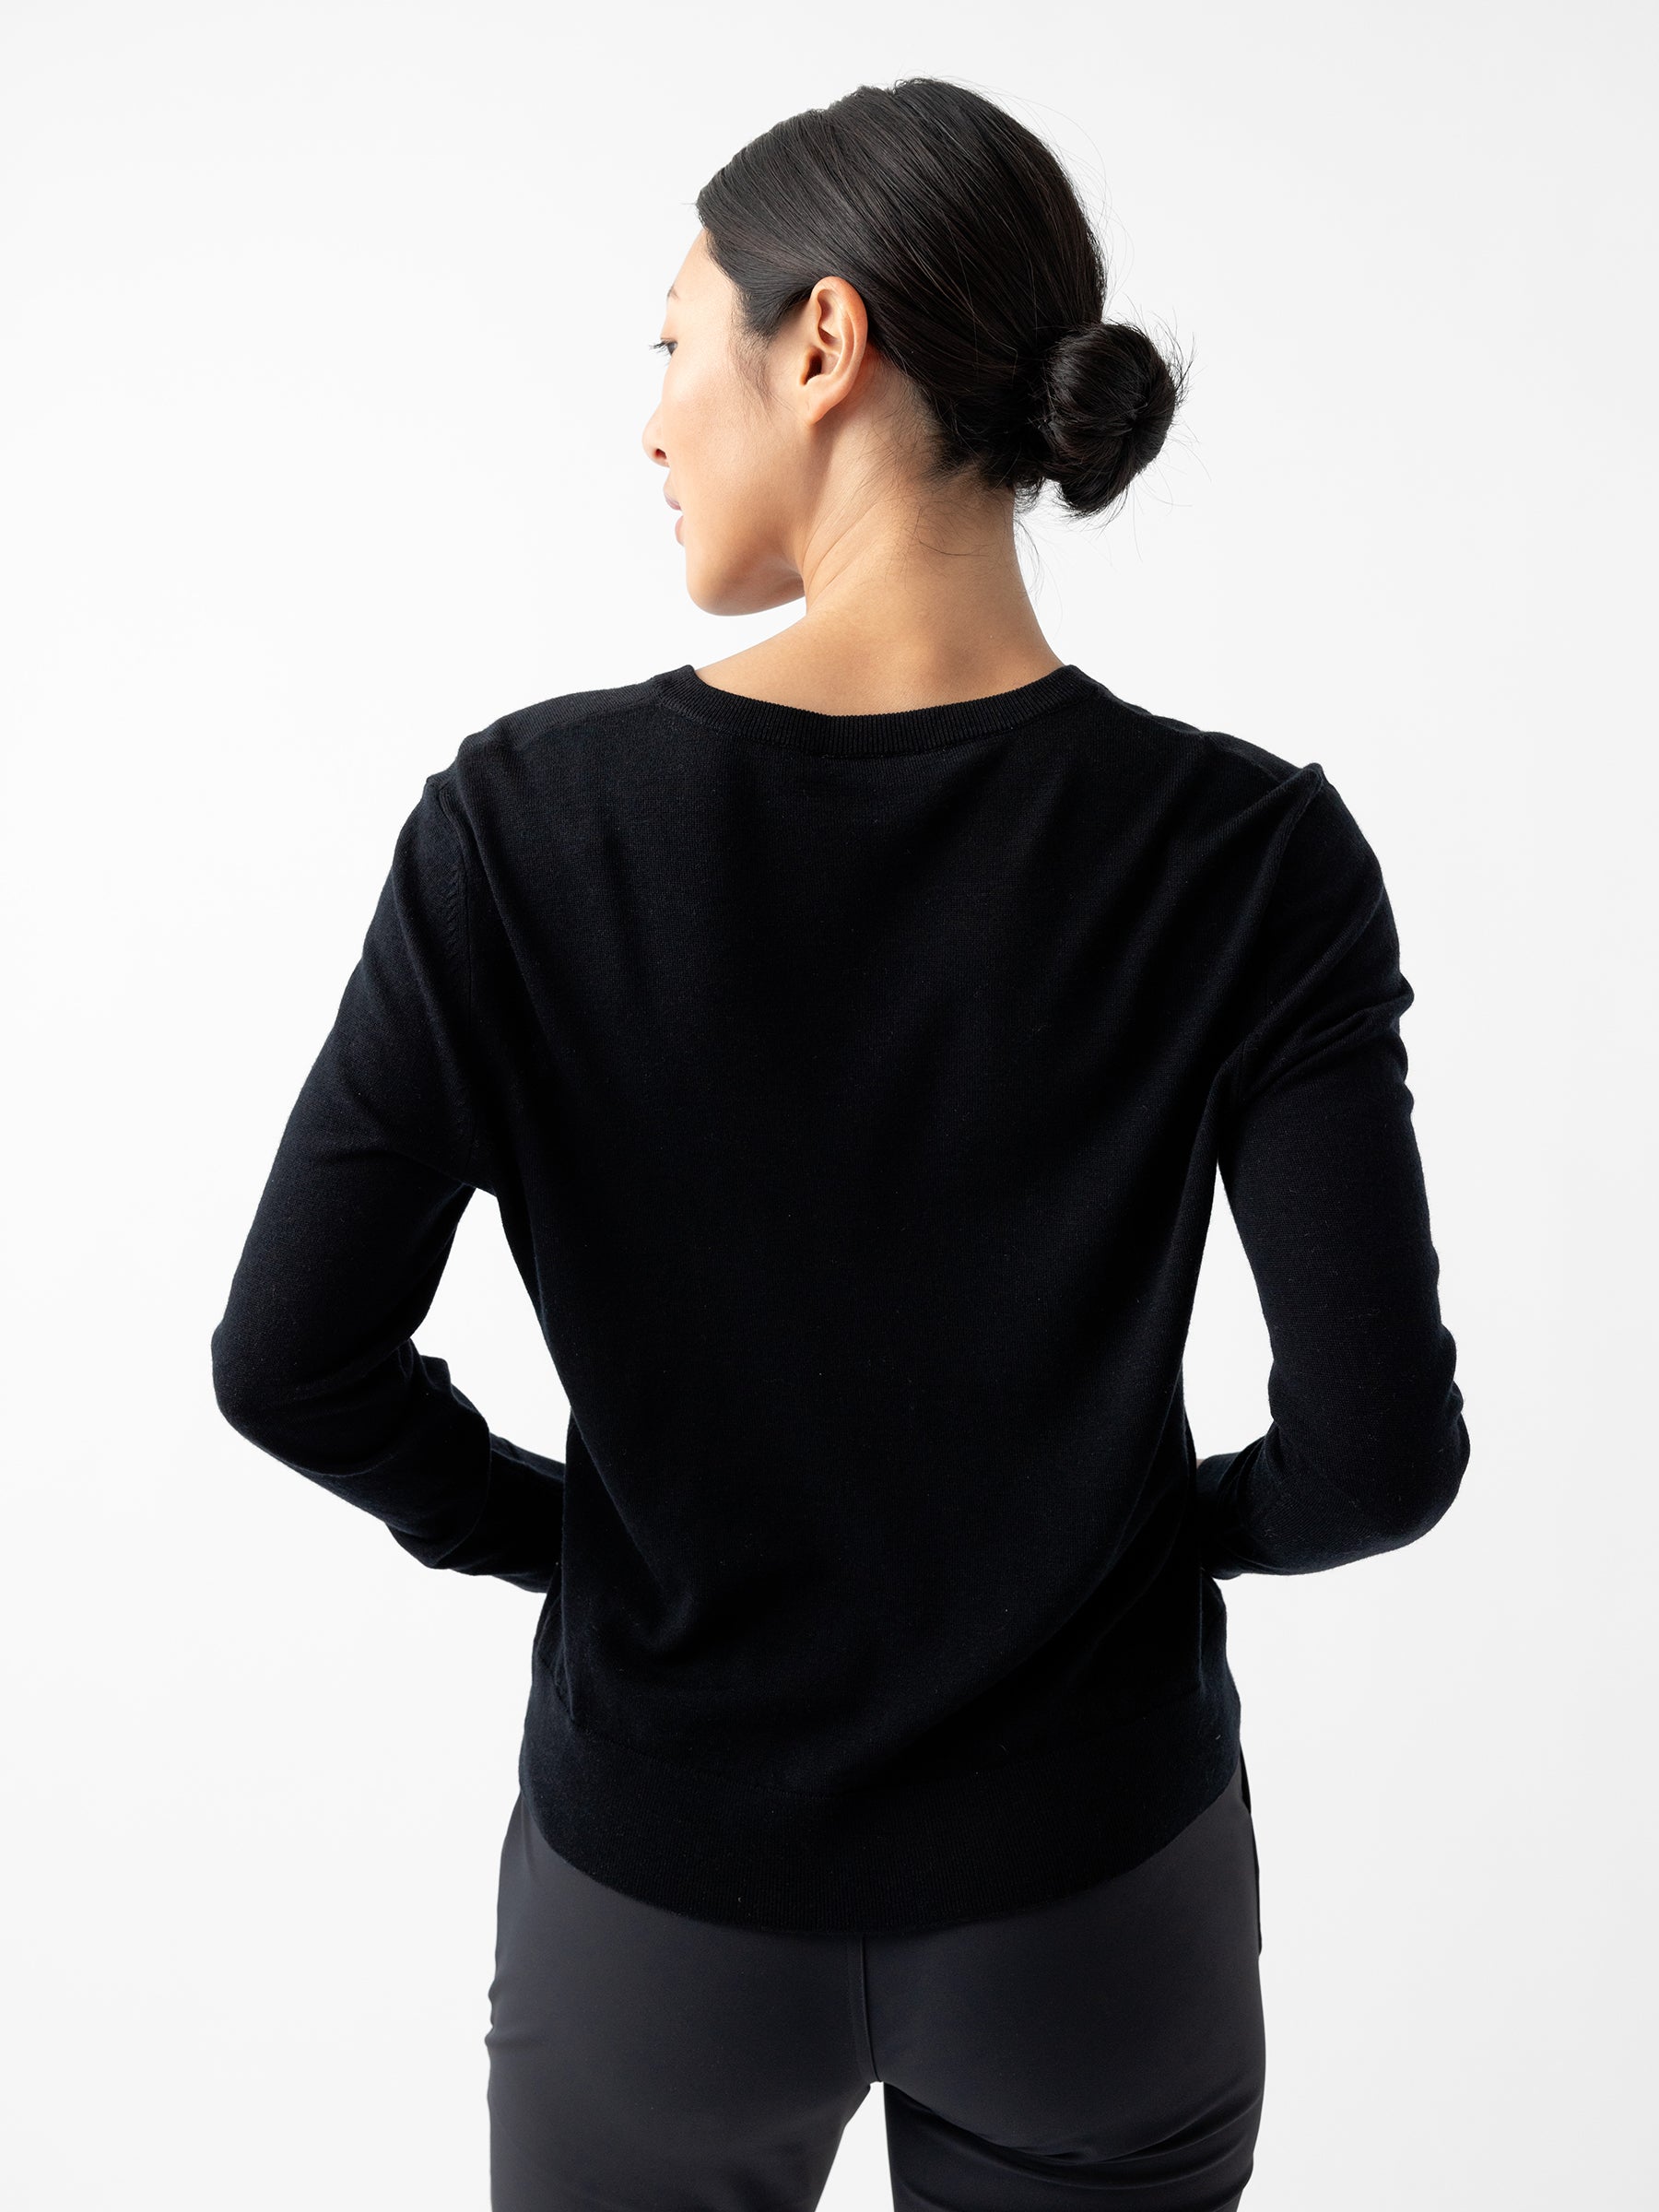 A person with dark hair tied in a low bun is wearing a black Women's AirKnit V-Neck Sweater from Cozy Earth and dark pants. They are standing facing away from the camera against a plain white background, with their hands placed on their hips. |Color:Jet Black